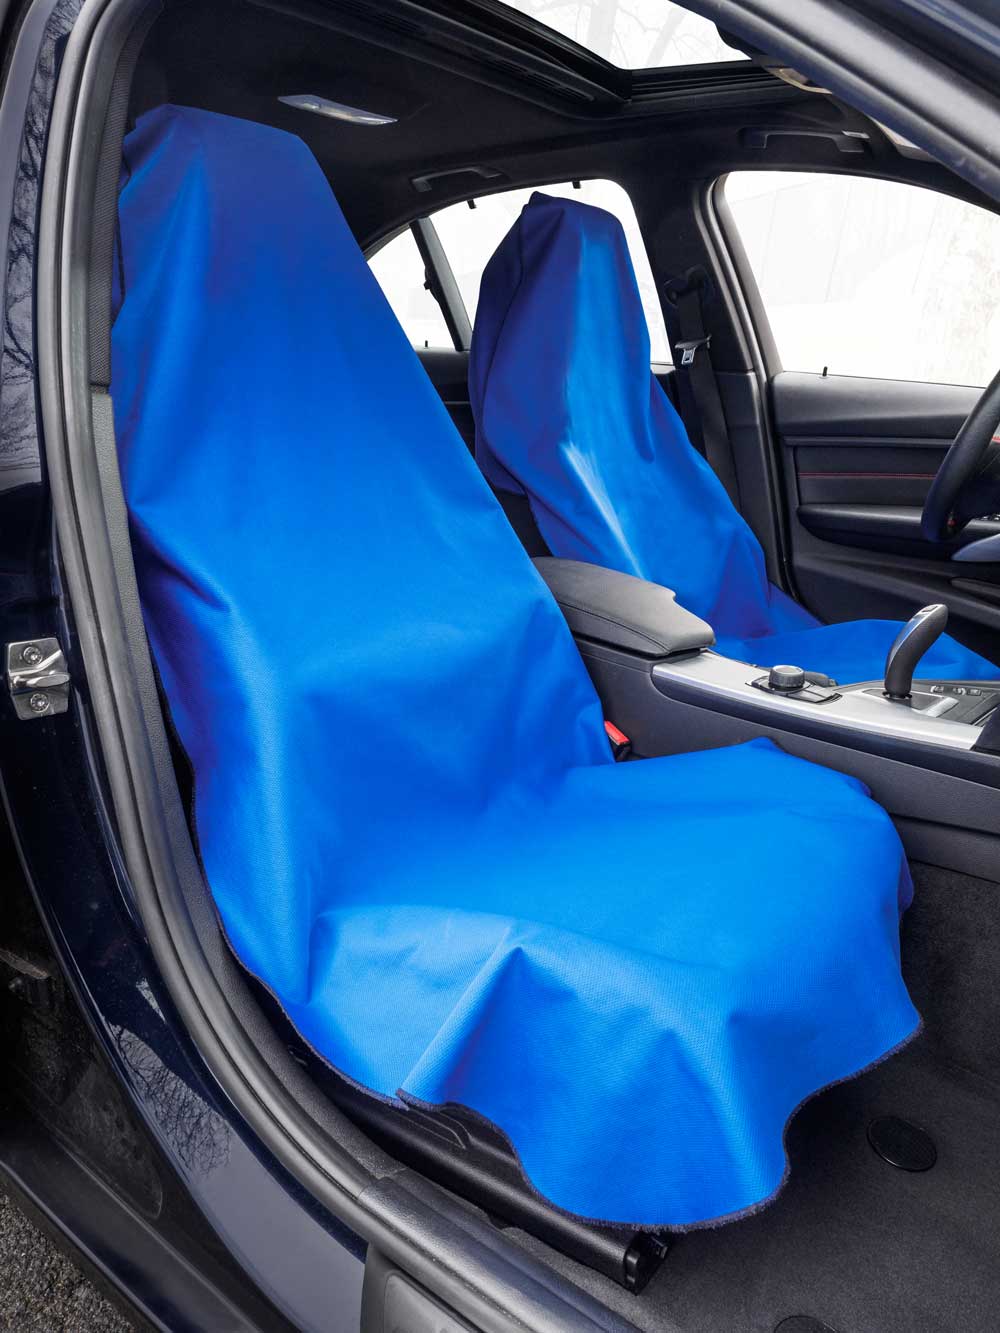 2 xl truck waterproof seat covers in a vehicle #color_black #color_light_gray #color_royal_blue #color_tan #color_red #color_purple #color_fuchsia